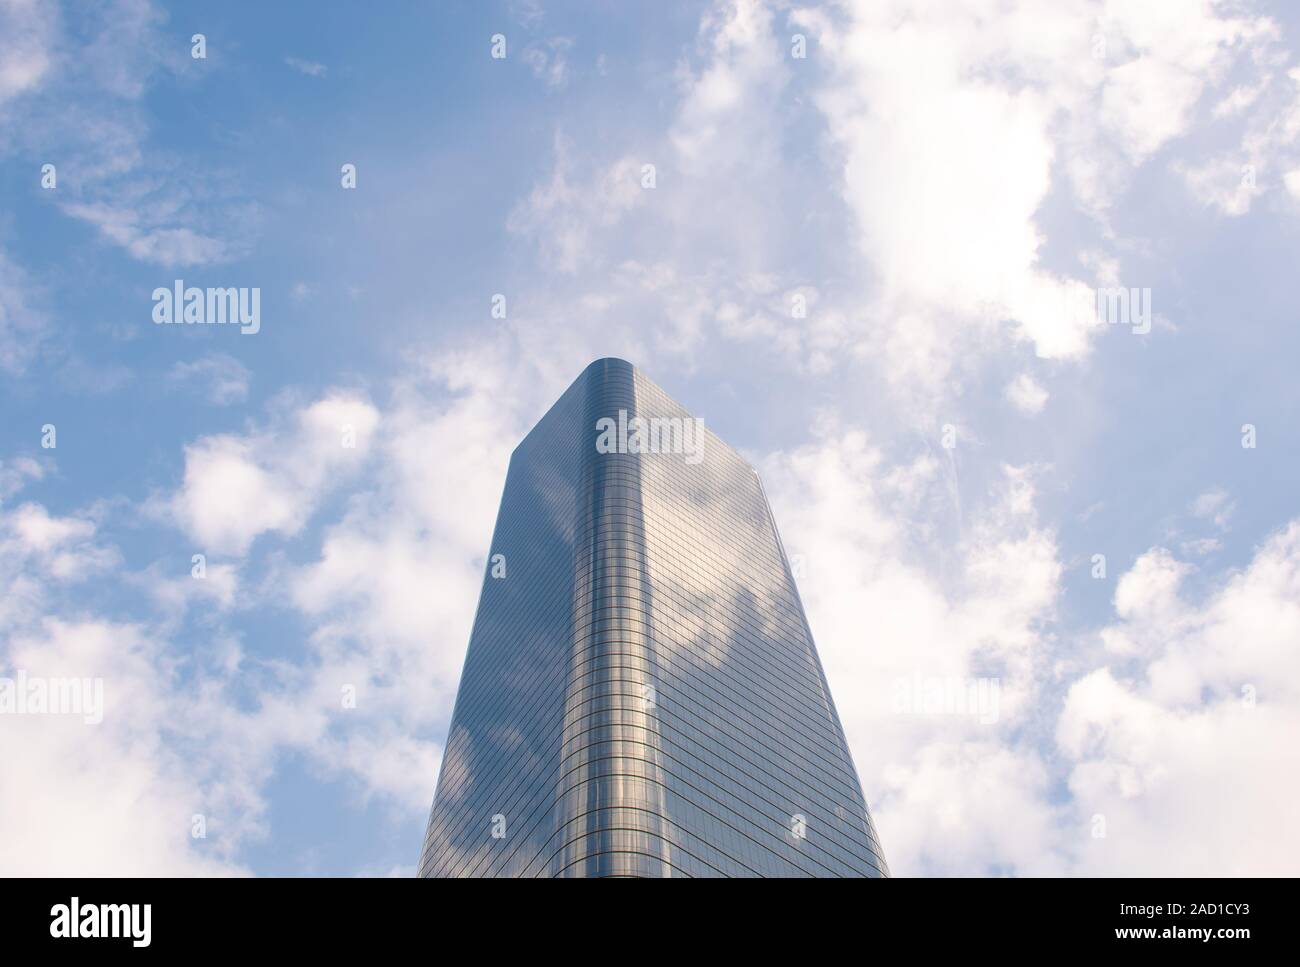 Tall glass building with cloudy sky background - center bright - space for caption Stock Photo